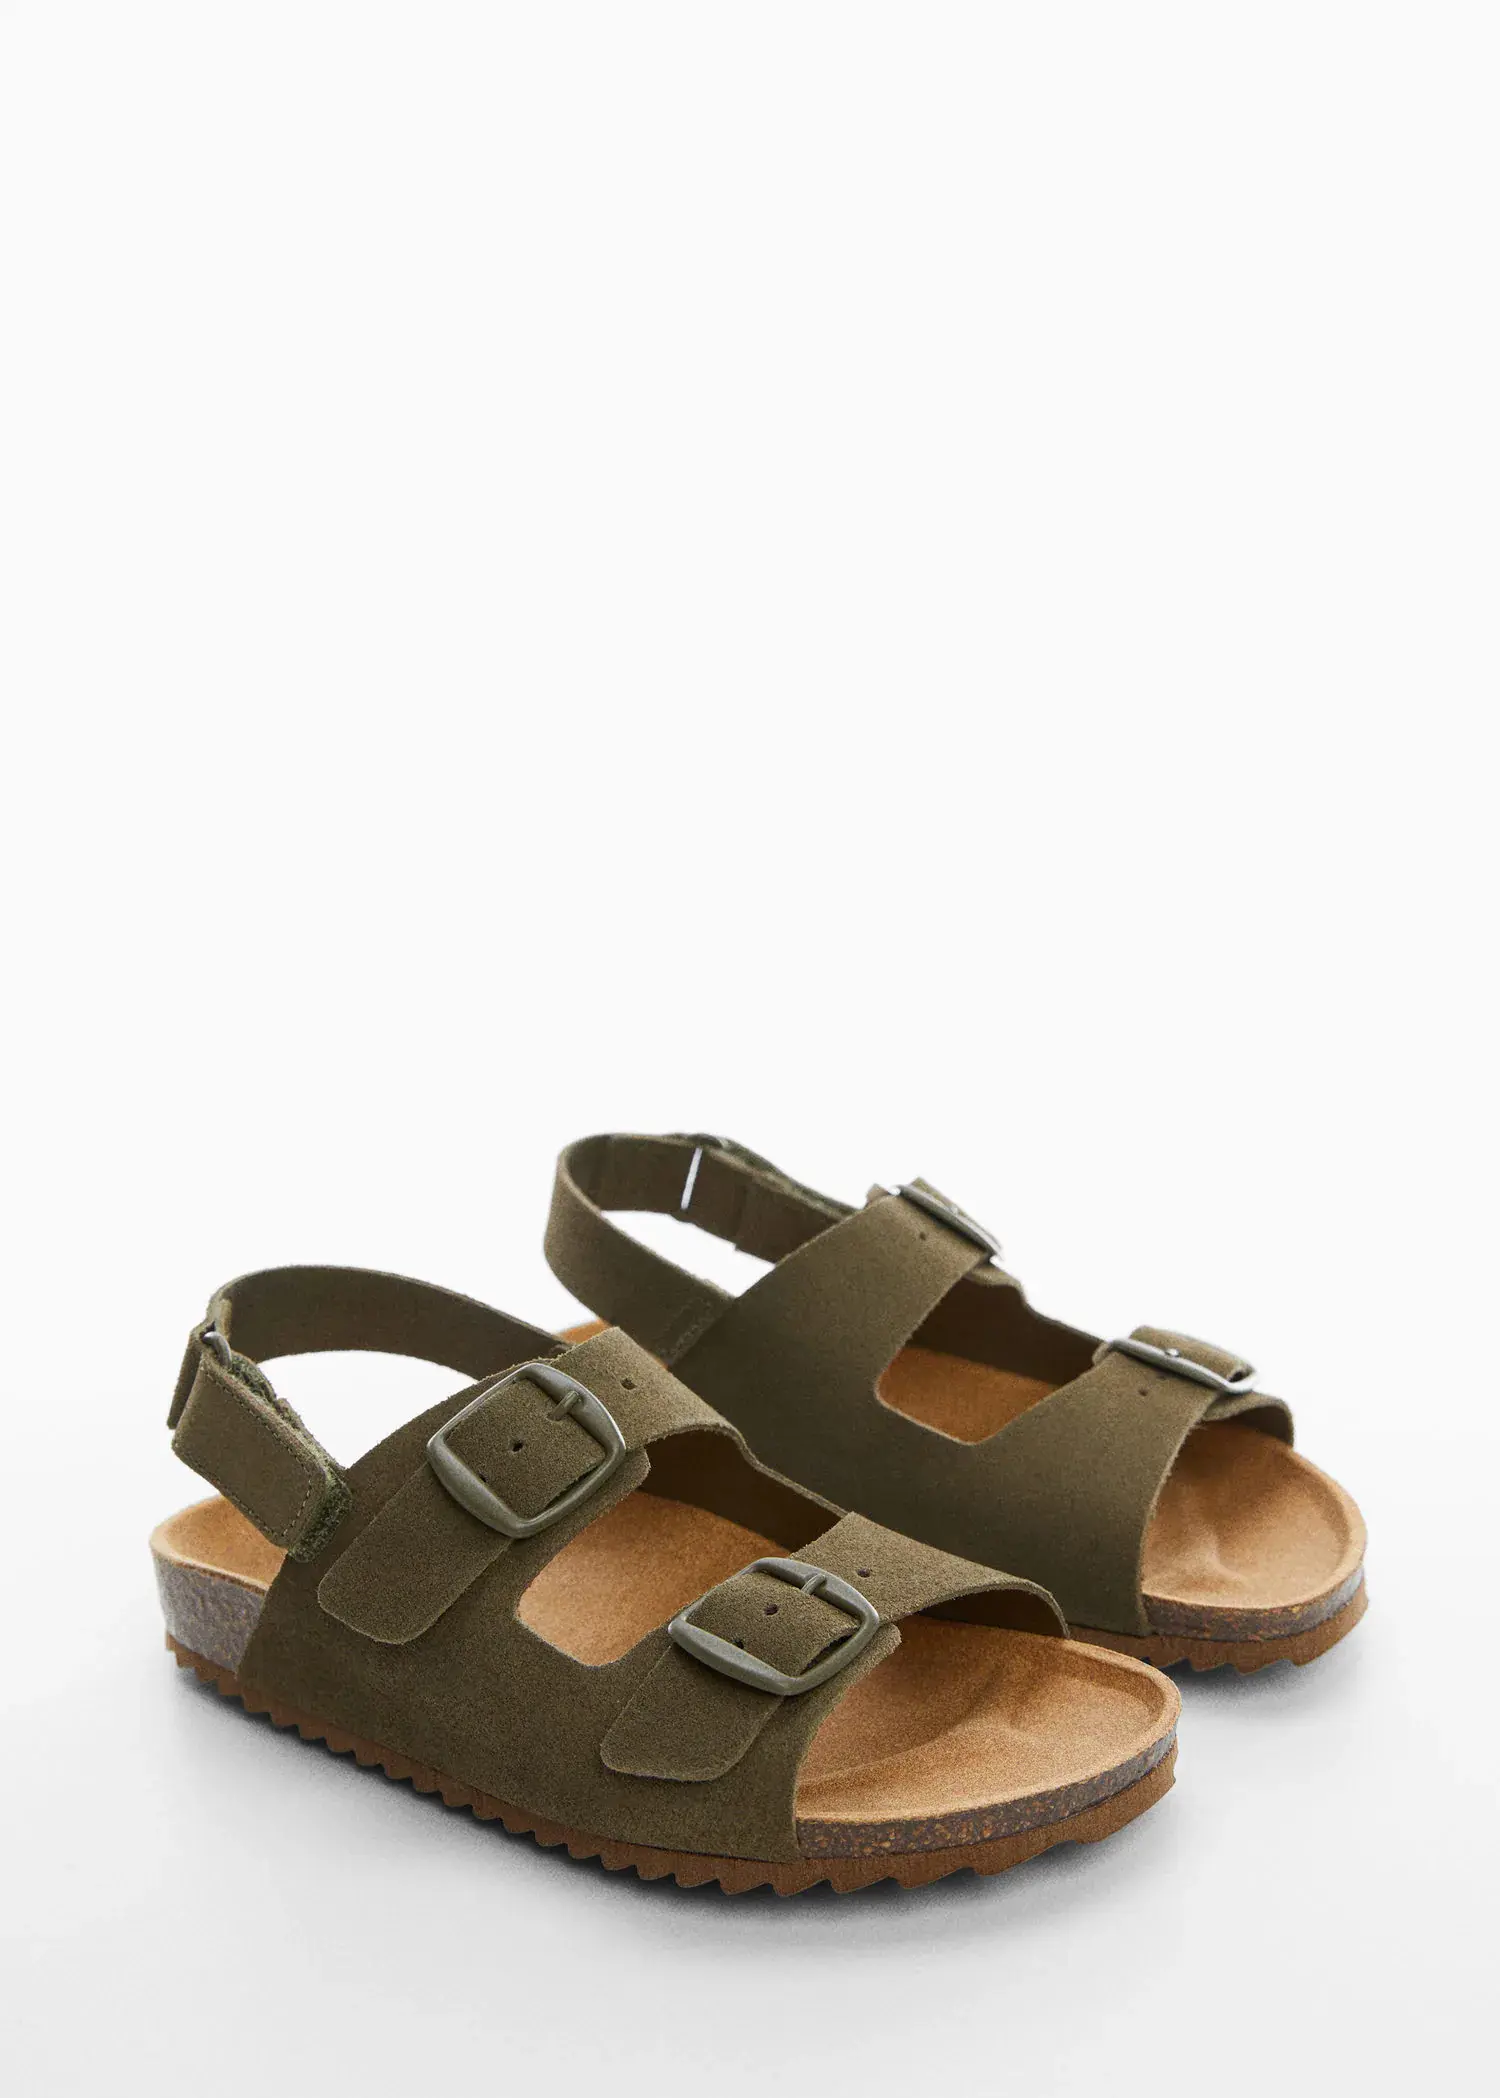 Mango KIDS/ Leather buckle sandal. a close up of a pair of sandals on a white surface 